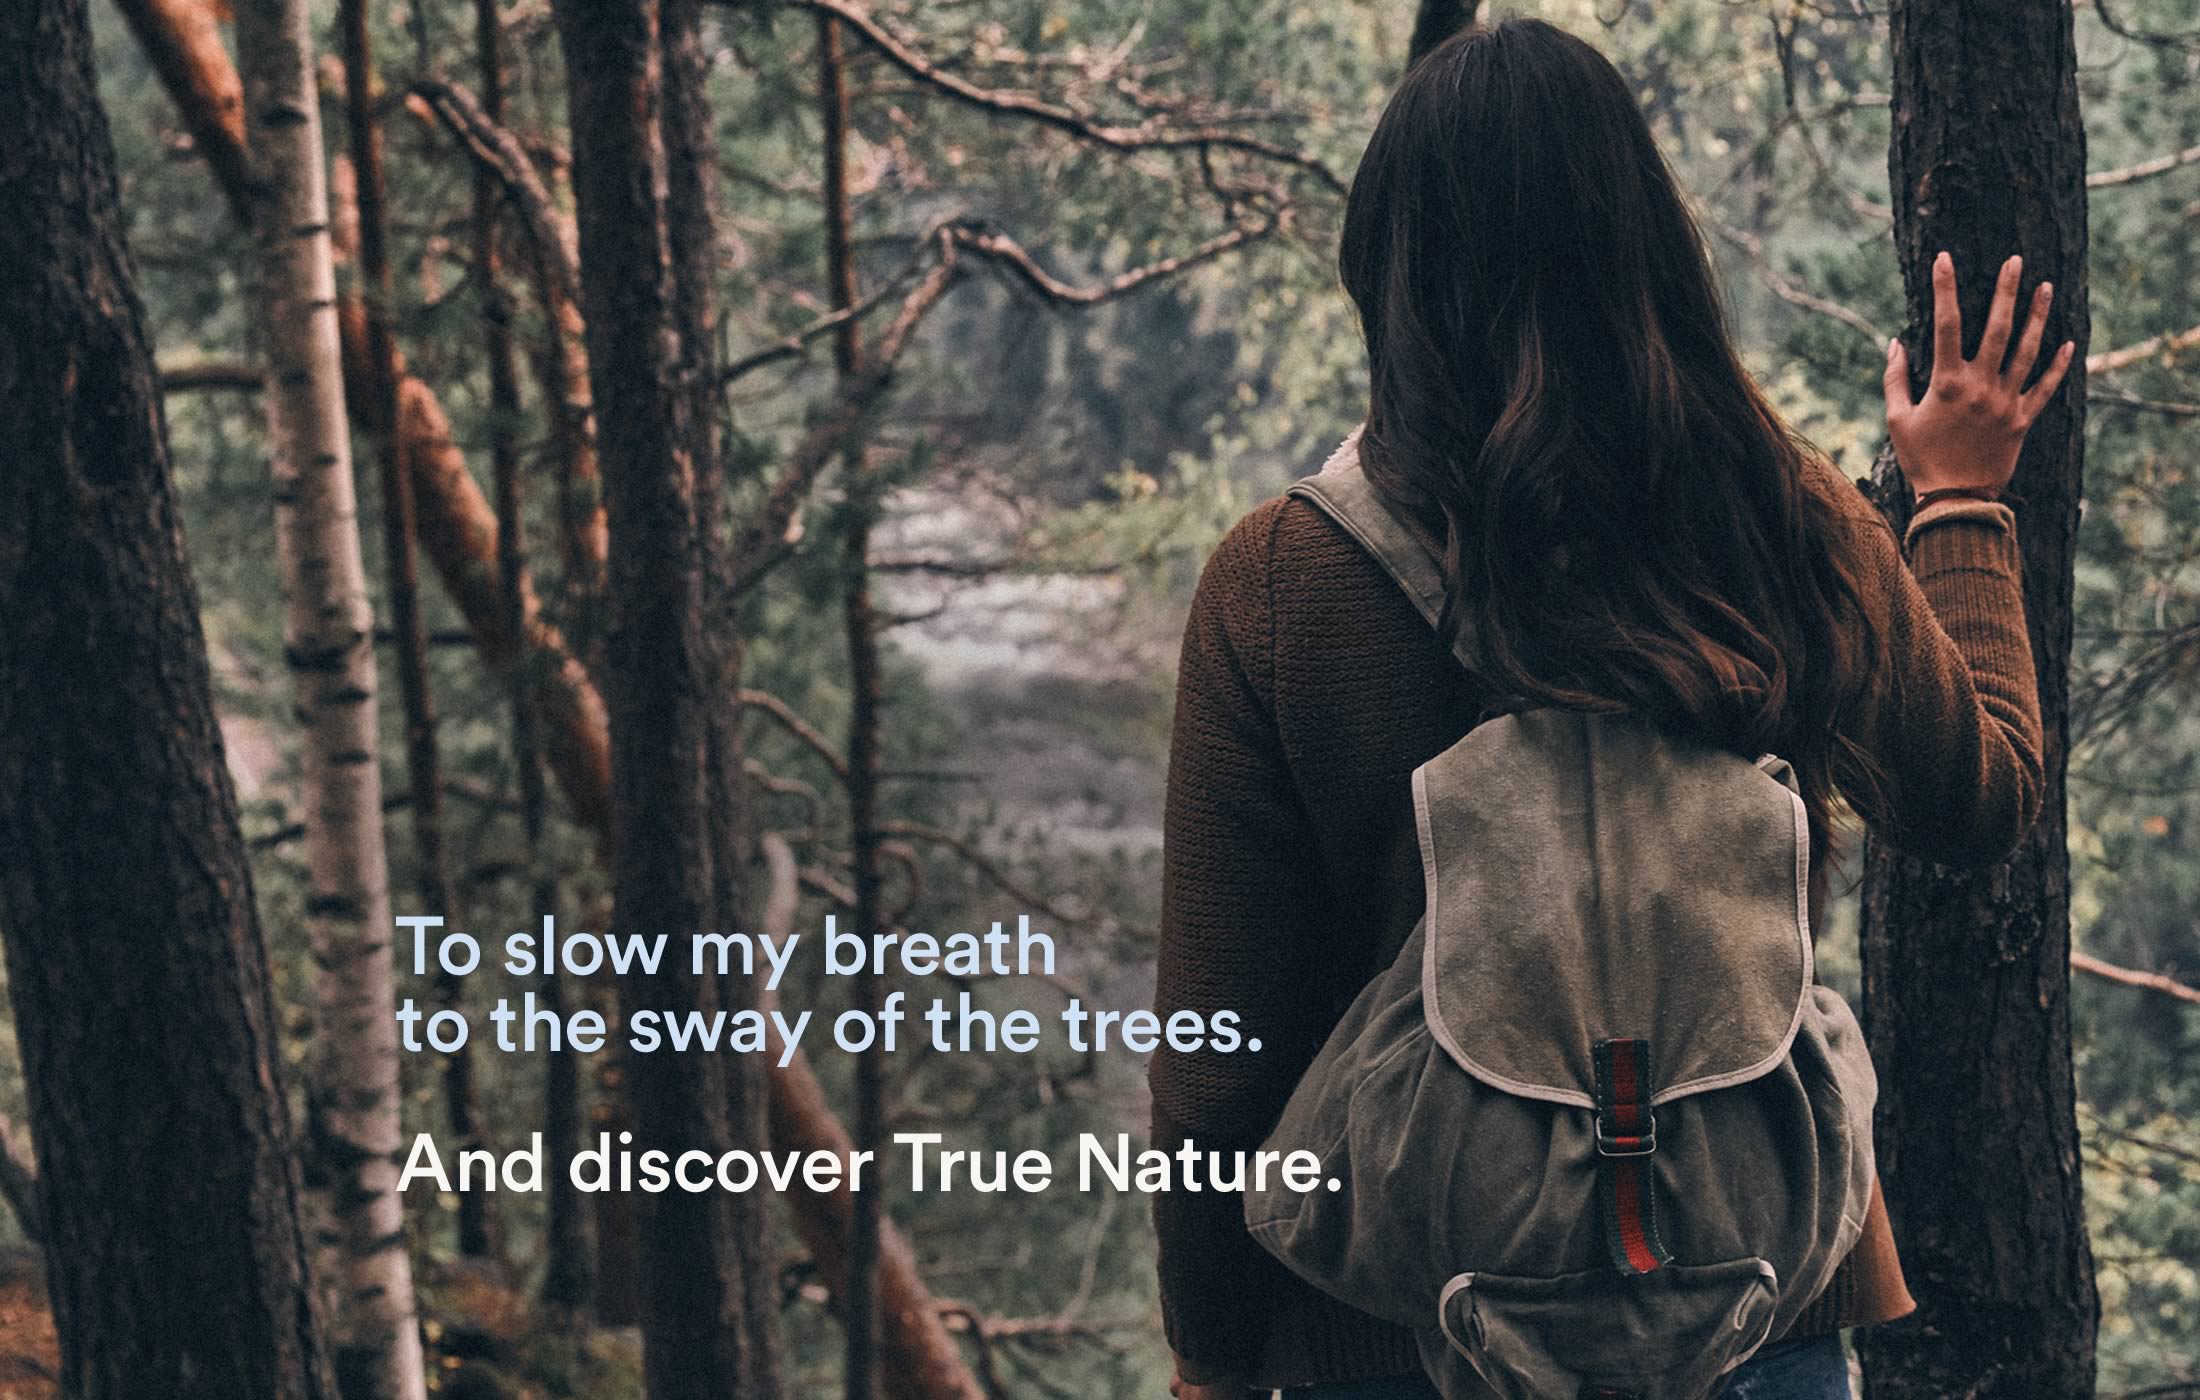 Image of a young adult in a dense forest surveying a river below, captioned as 'To slow my breath to the sway of the trees.'